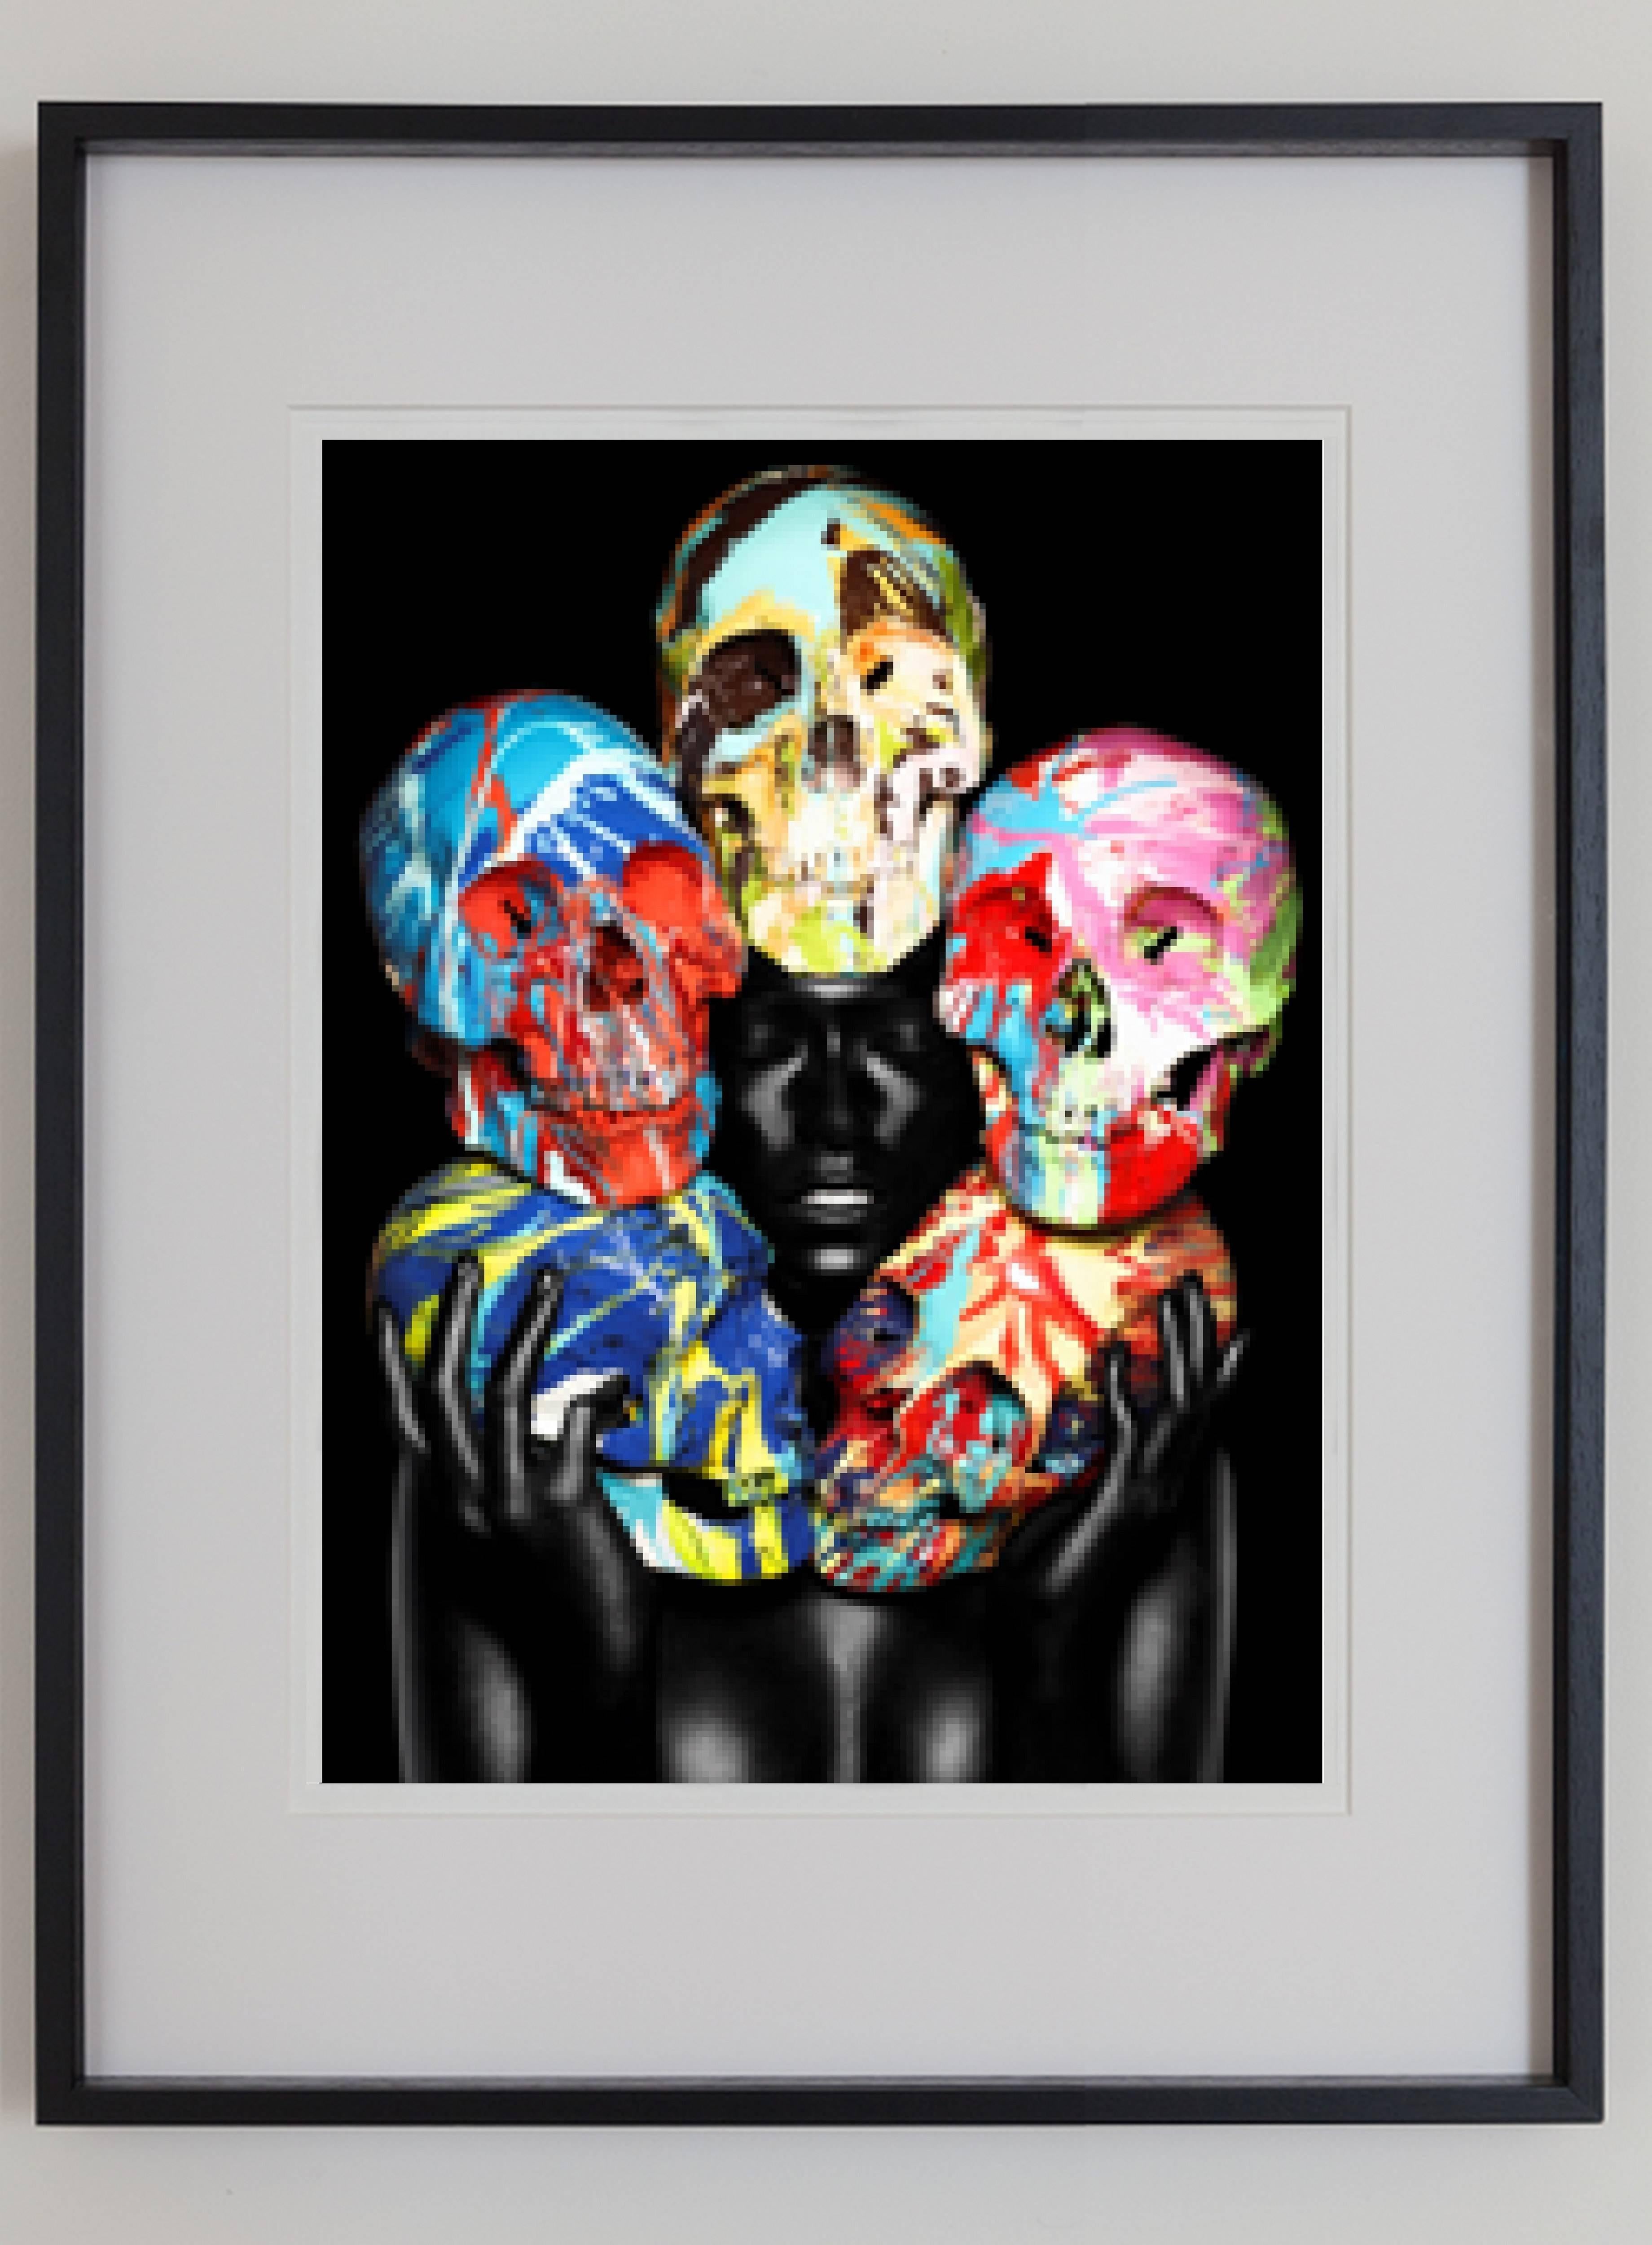 Painted Skulls / Eyes closed - Photograph by Rankin and Damien Hirst